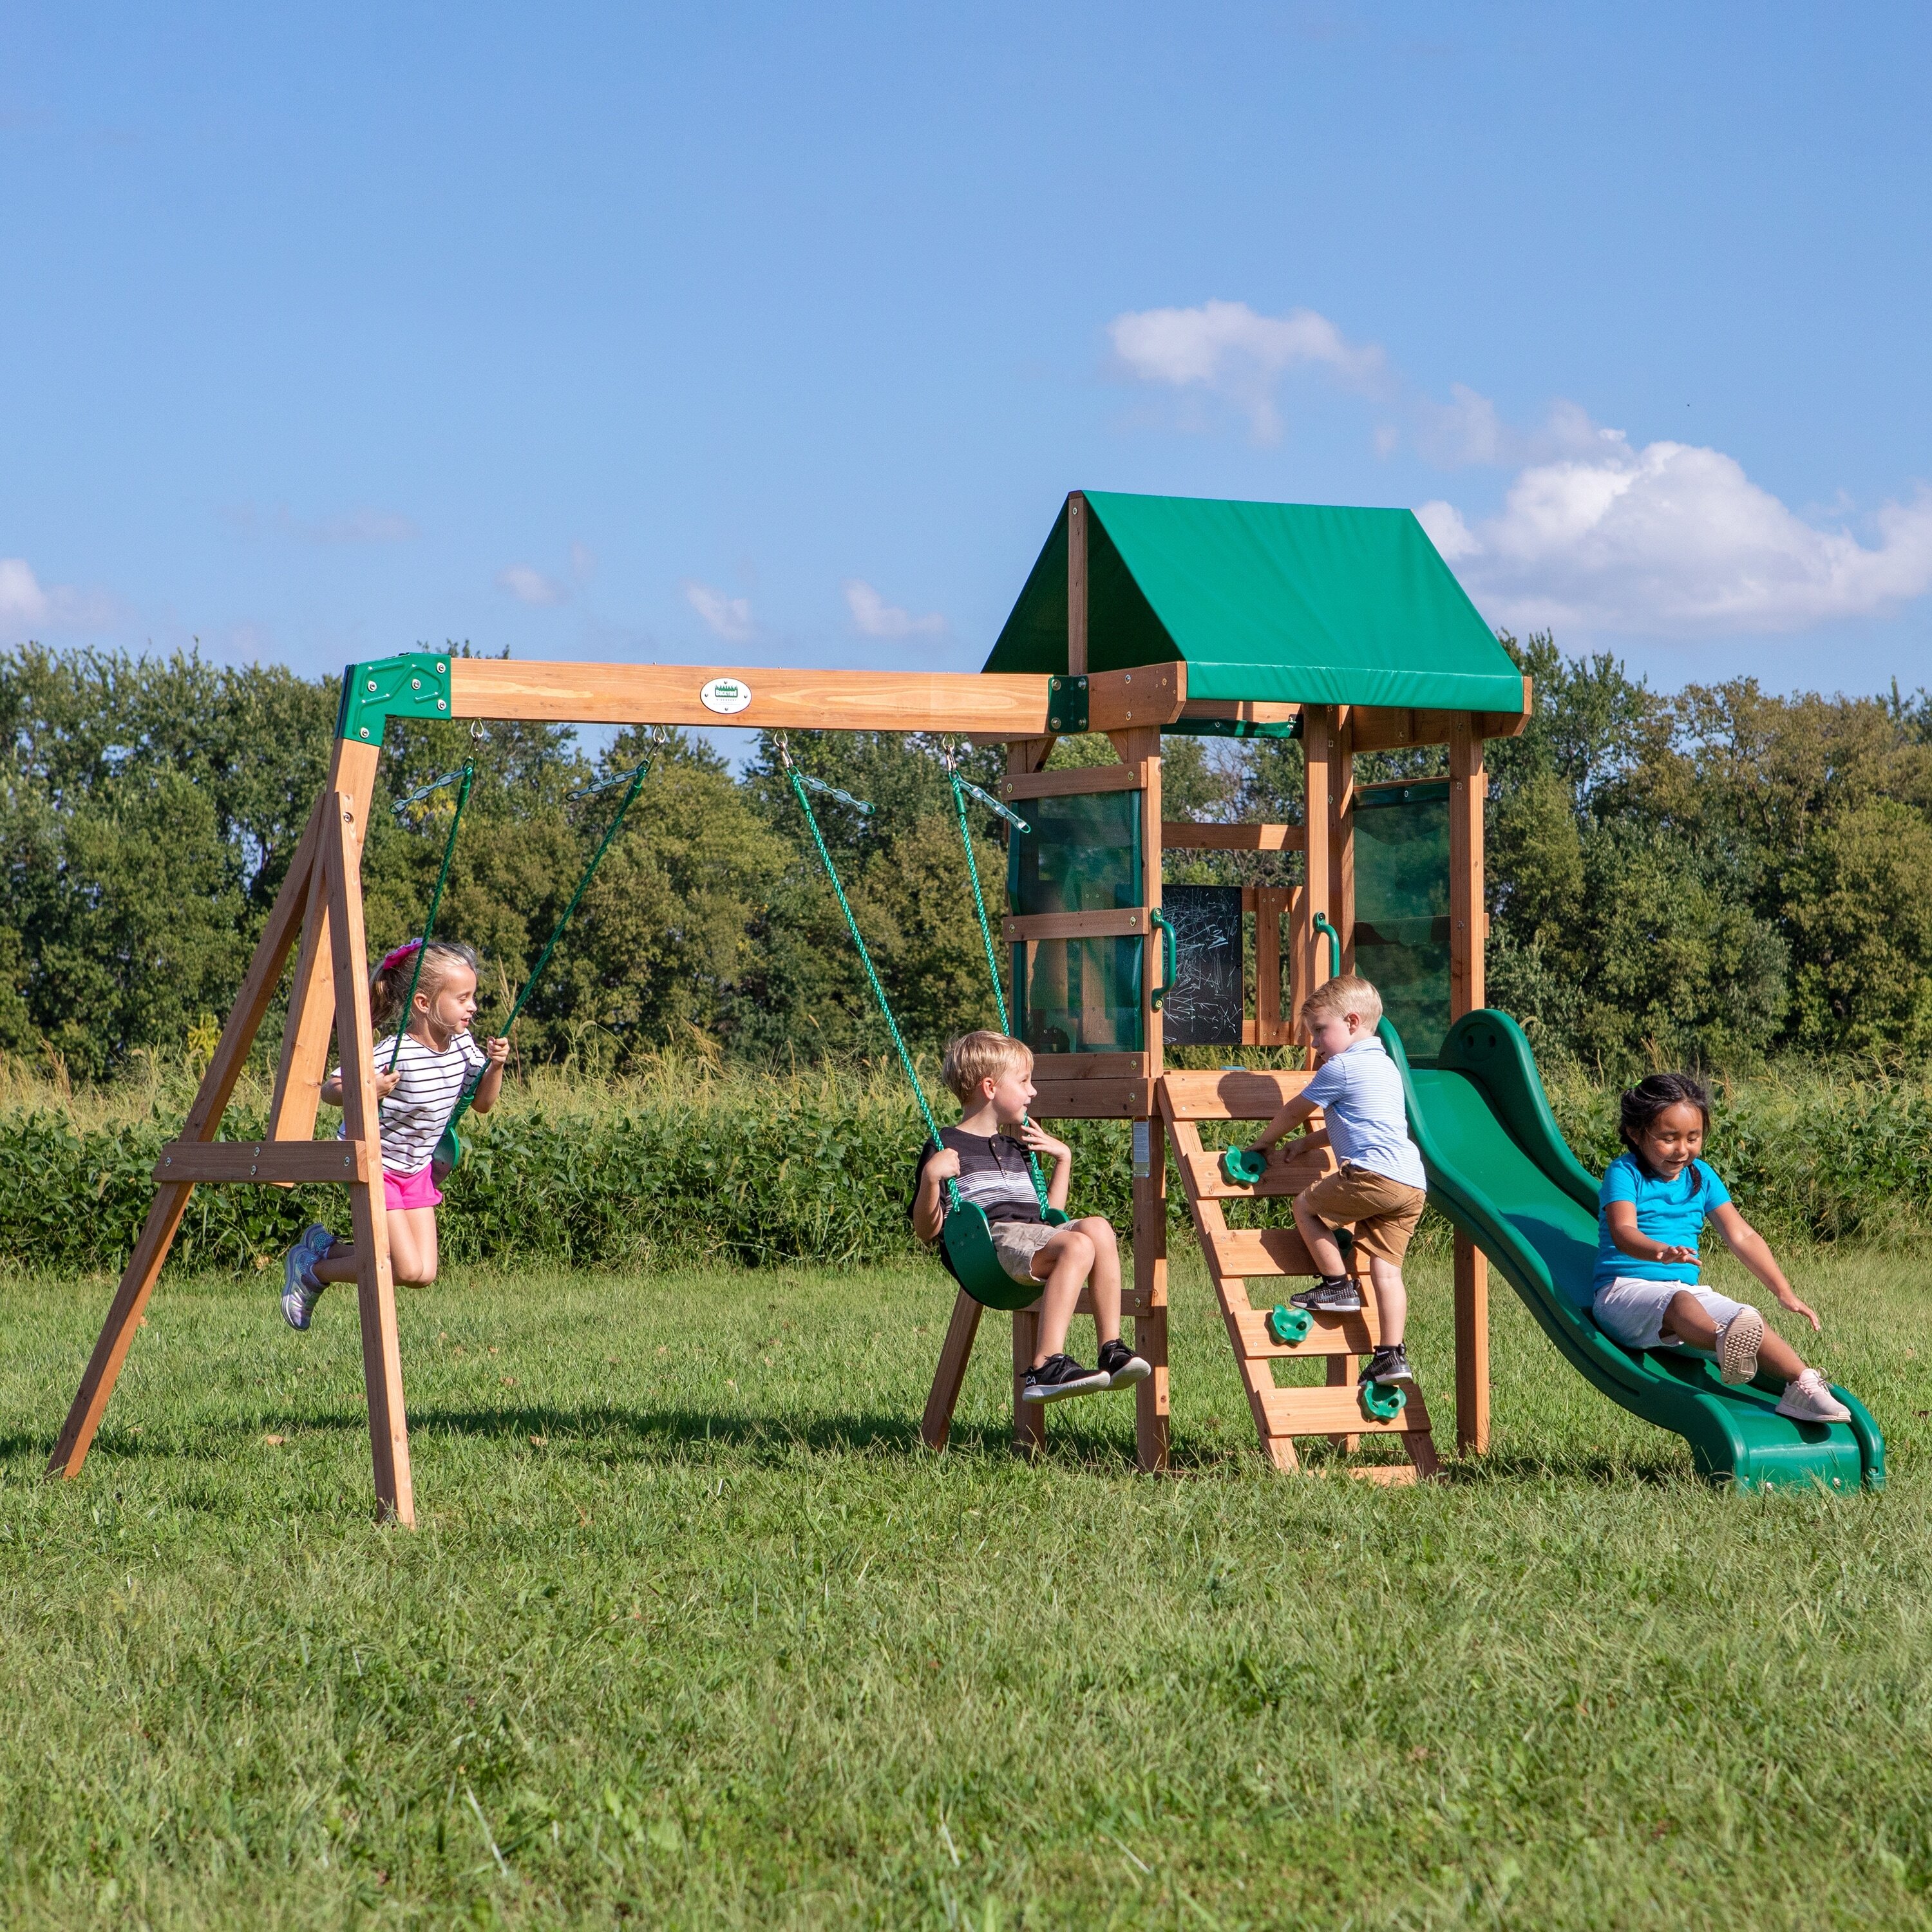 Kids’ Wooden Treehouse Kits With Swing Sets